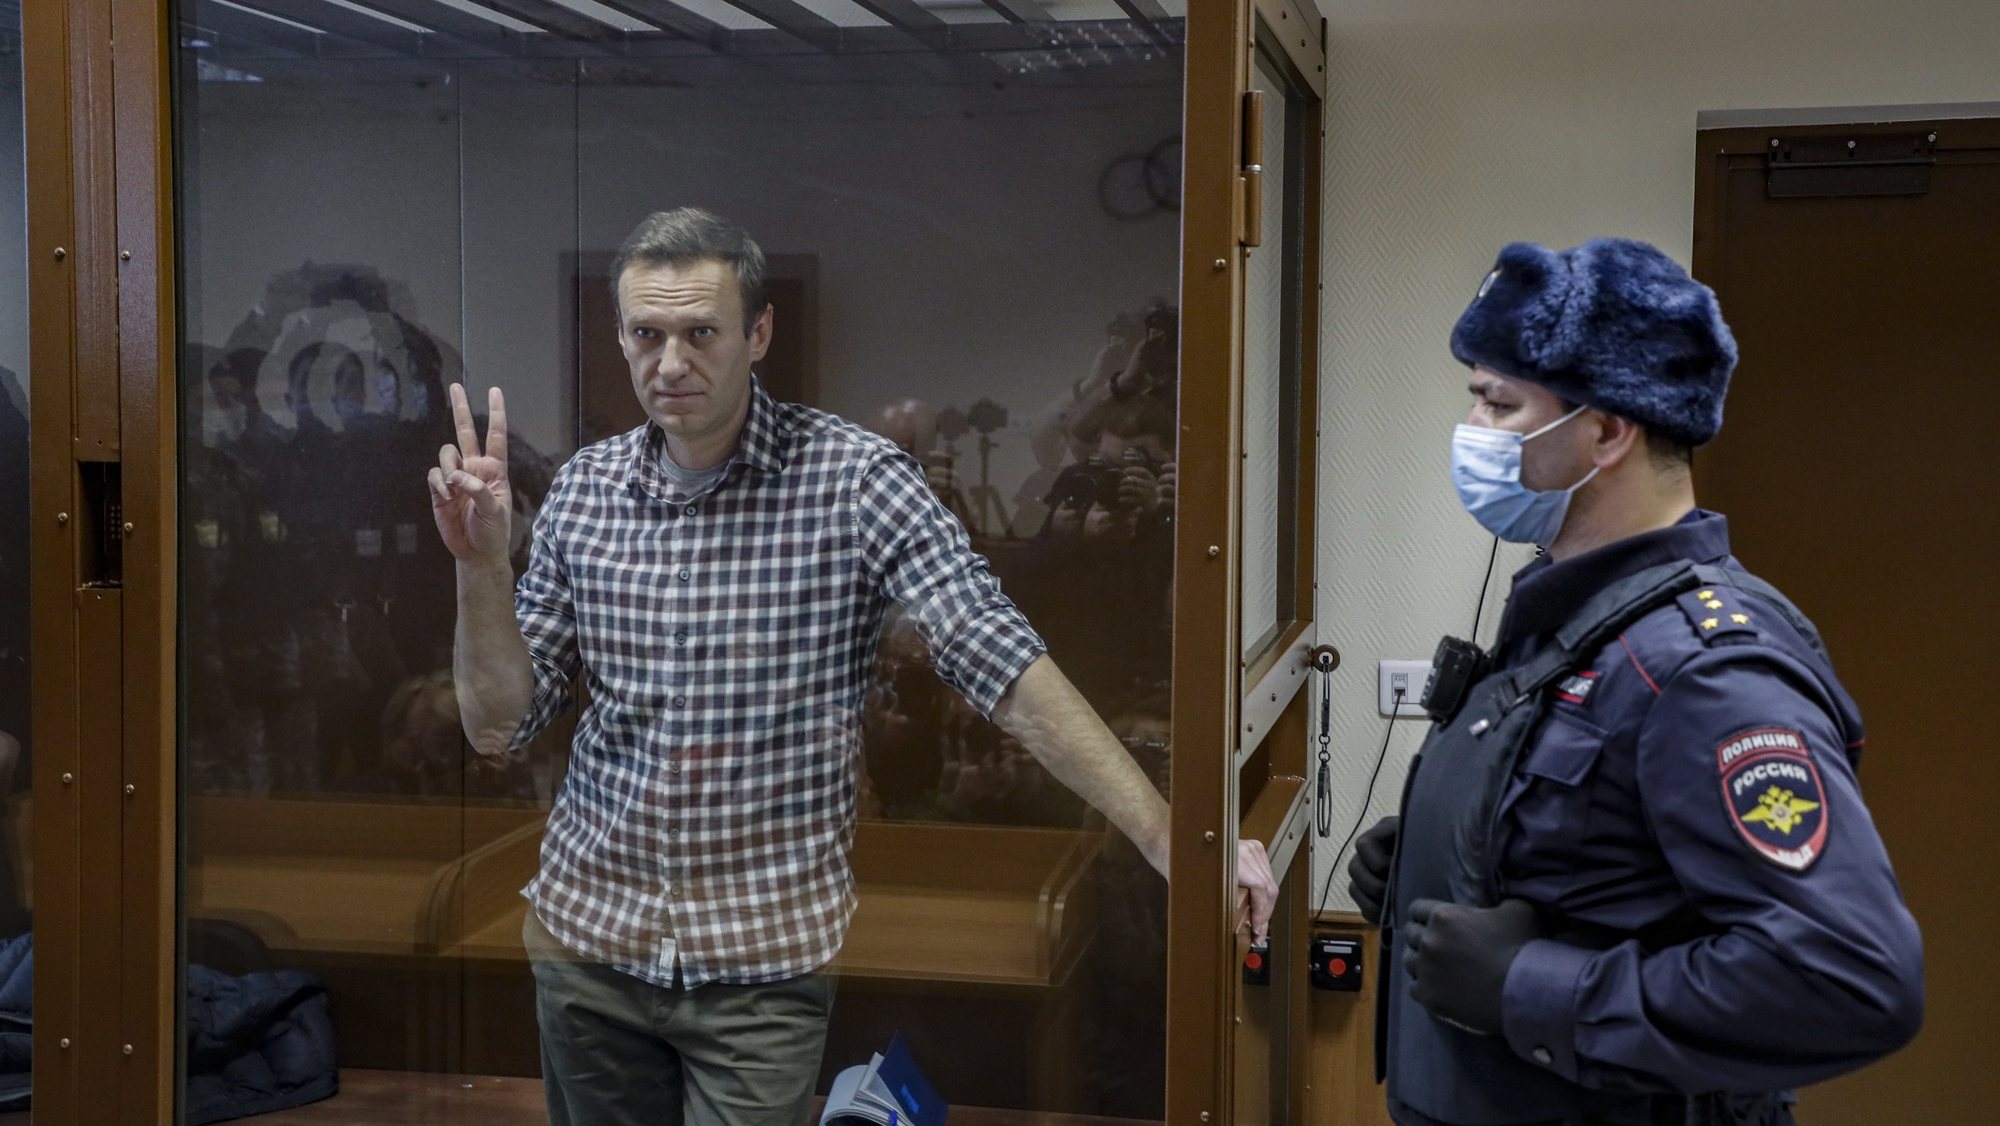 epa09108968 (FILE) Russian opposition leader Alexei Navalny gestures inside a glass cage prior to a hearing at the Babushkinsky District Court in Moscow, Russia, 20 February 2021 (reissued 31 March 2021). Russian opposition leader Alexei Navalny, who serves his 2,5 years sentence in a prison colony in the town of Pokrov in the Vladimir region, announced he is going on hunger strike in a protest of mistreatment in the prison.  EPA/YURI KOCHETKOV *** Local Caption *** 56711412